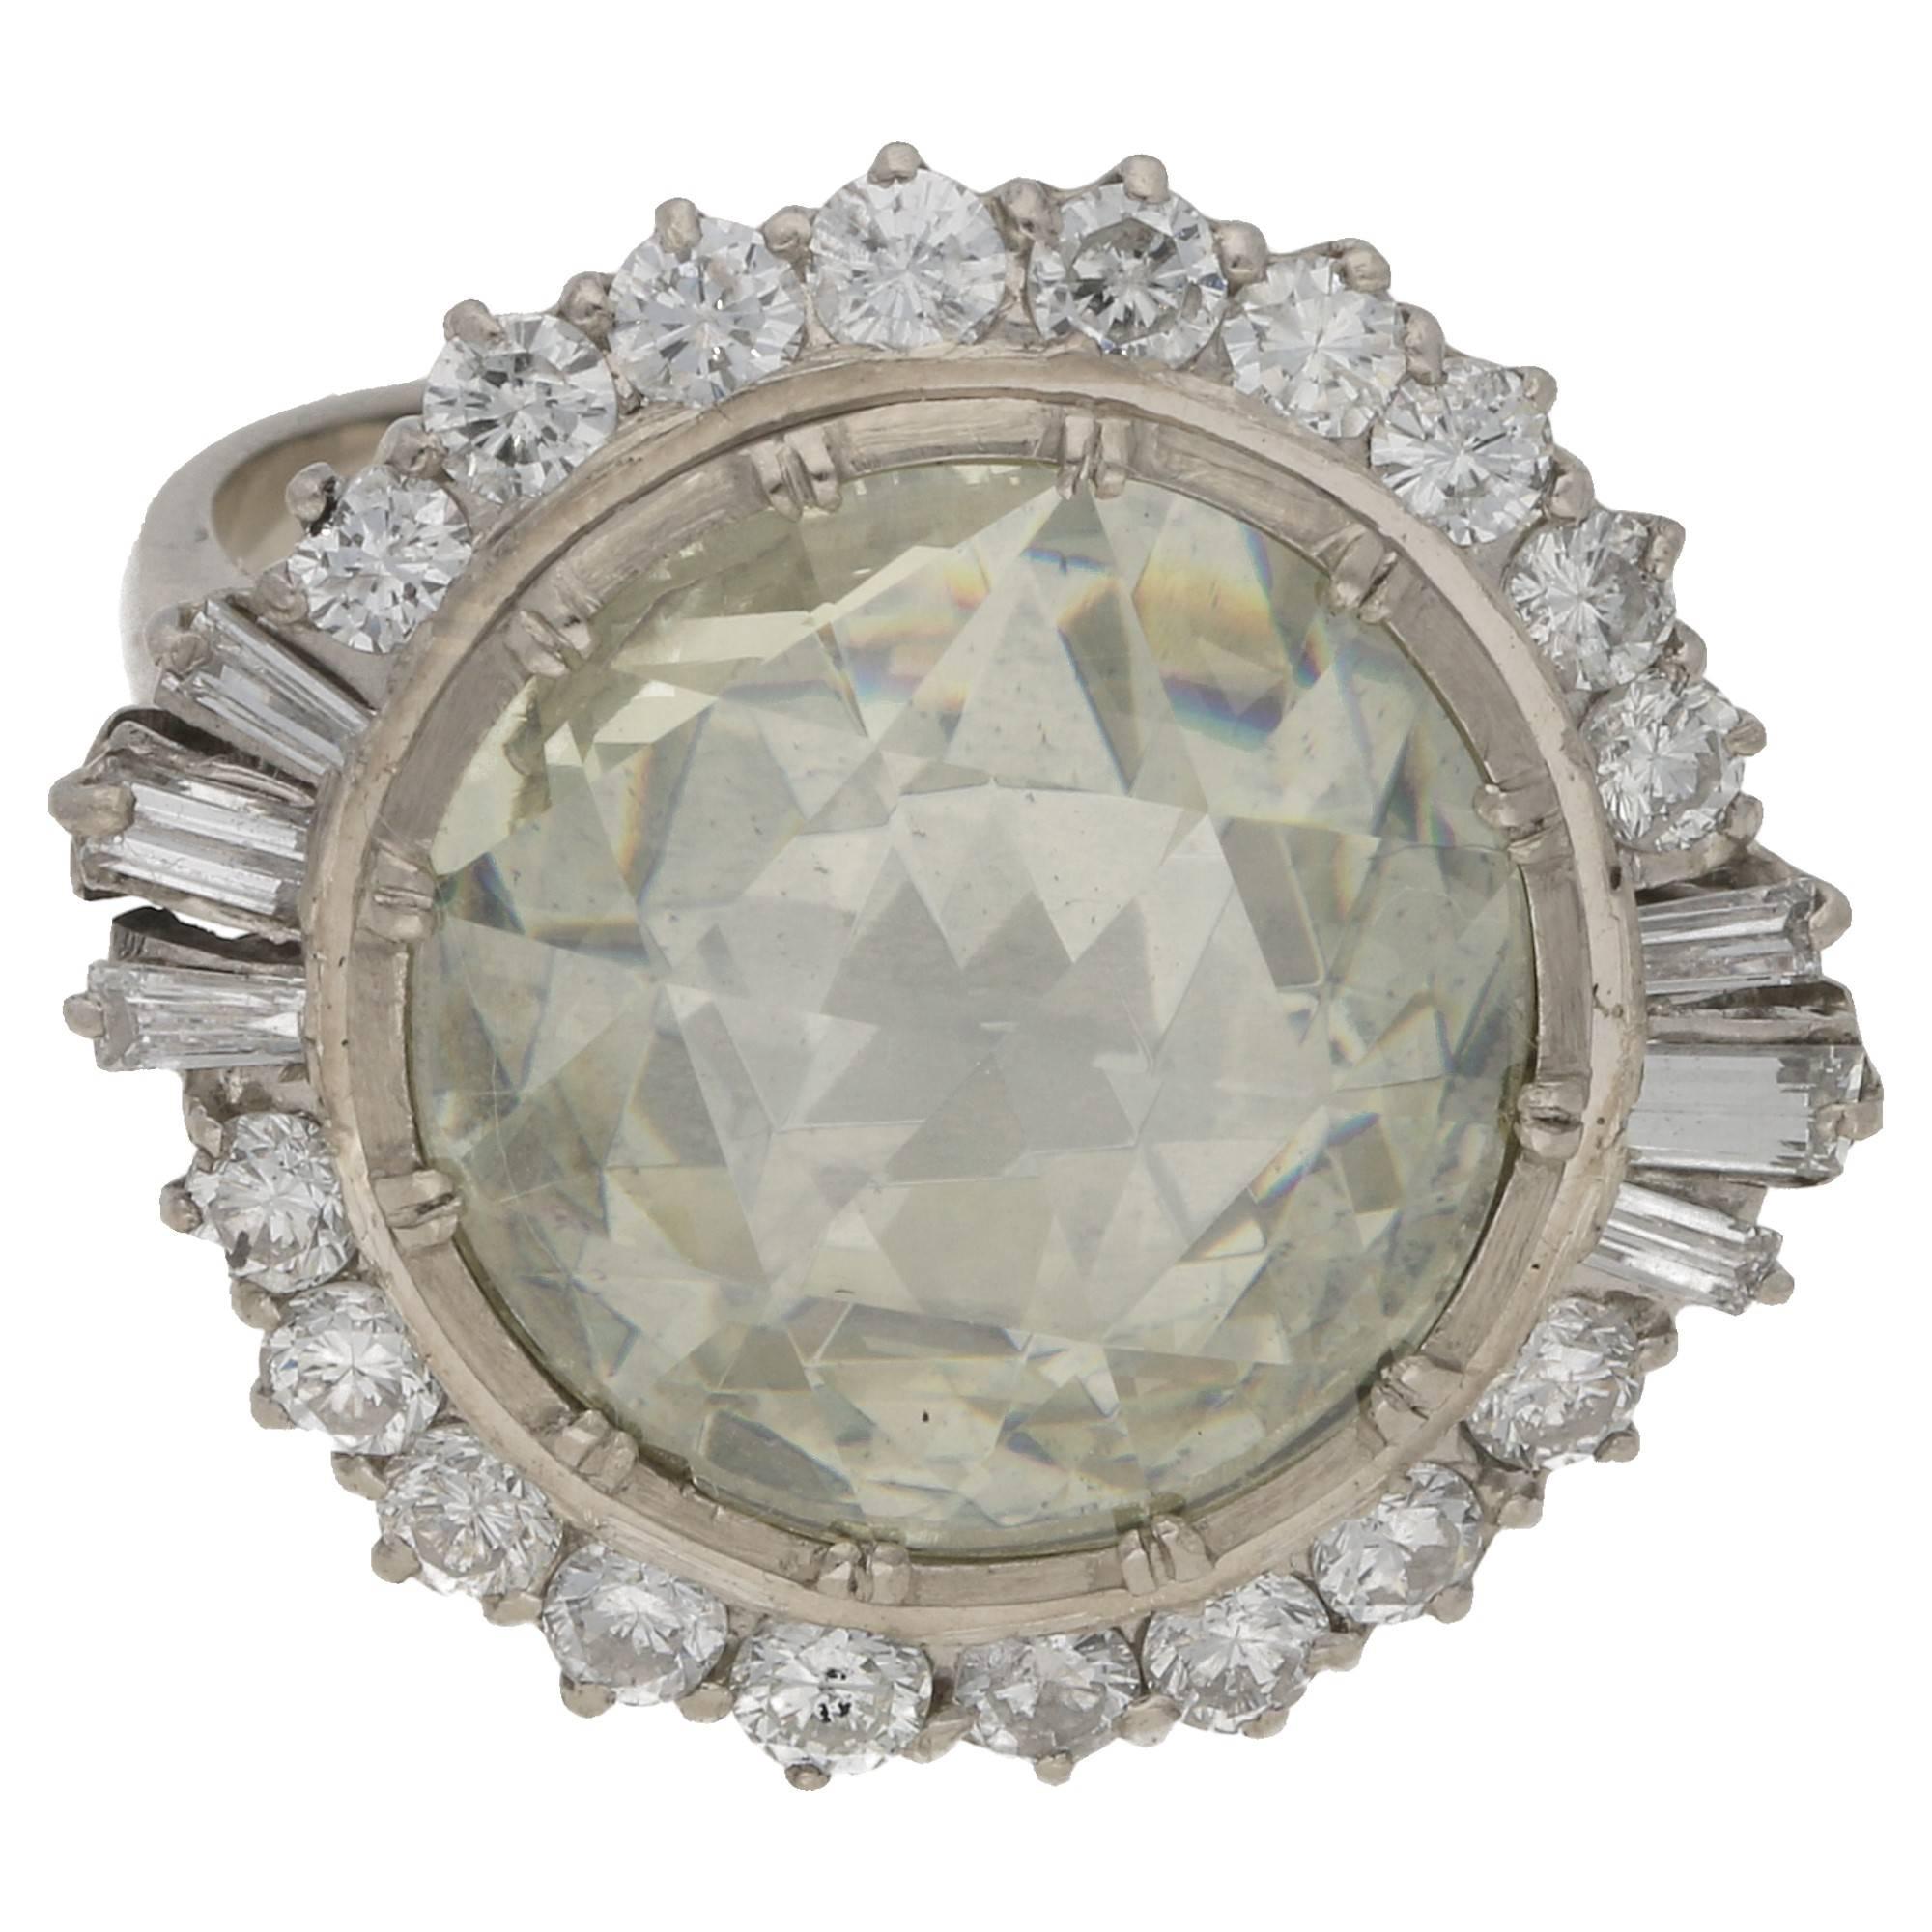 A significant rose cut Dimond cocktail ring. The ring is formed of a 4.66 carat rose cut diamond bezel set to the centre in a closed back setting. The principal stone is surrounded by a singular row of round brilliant cut diamonds peg set and